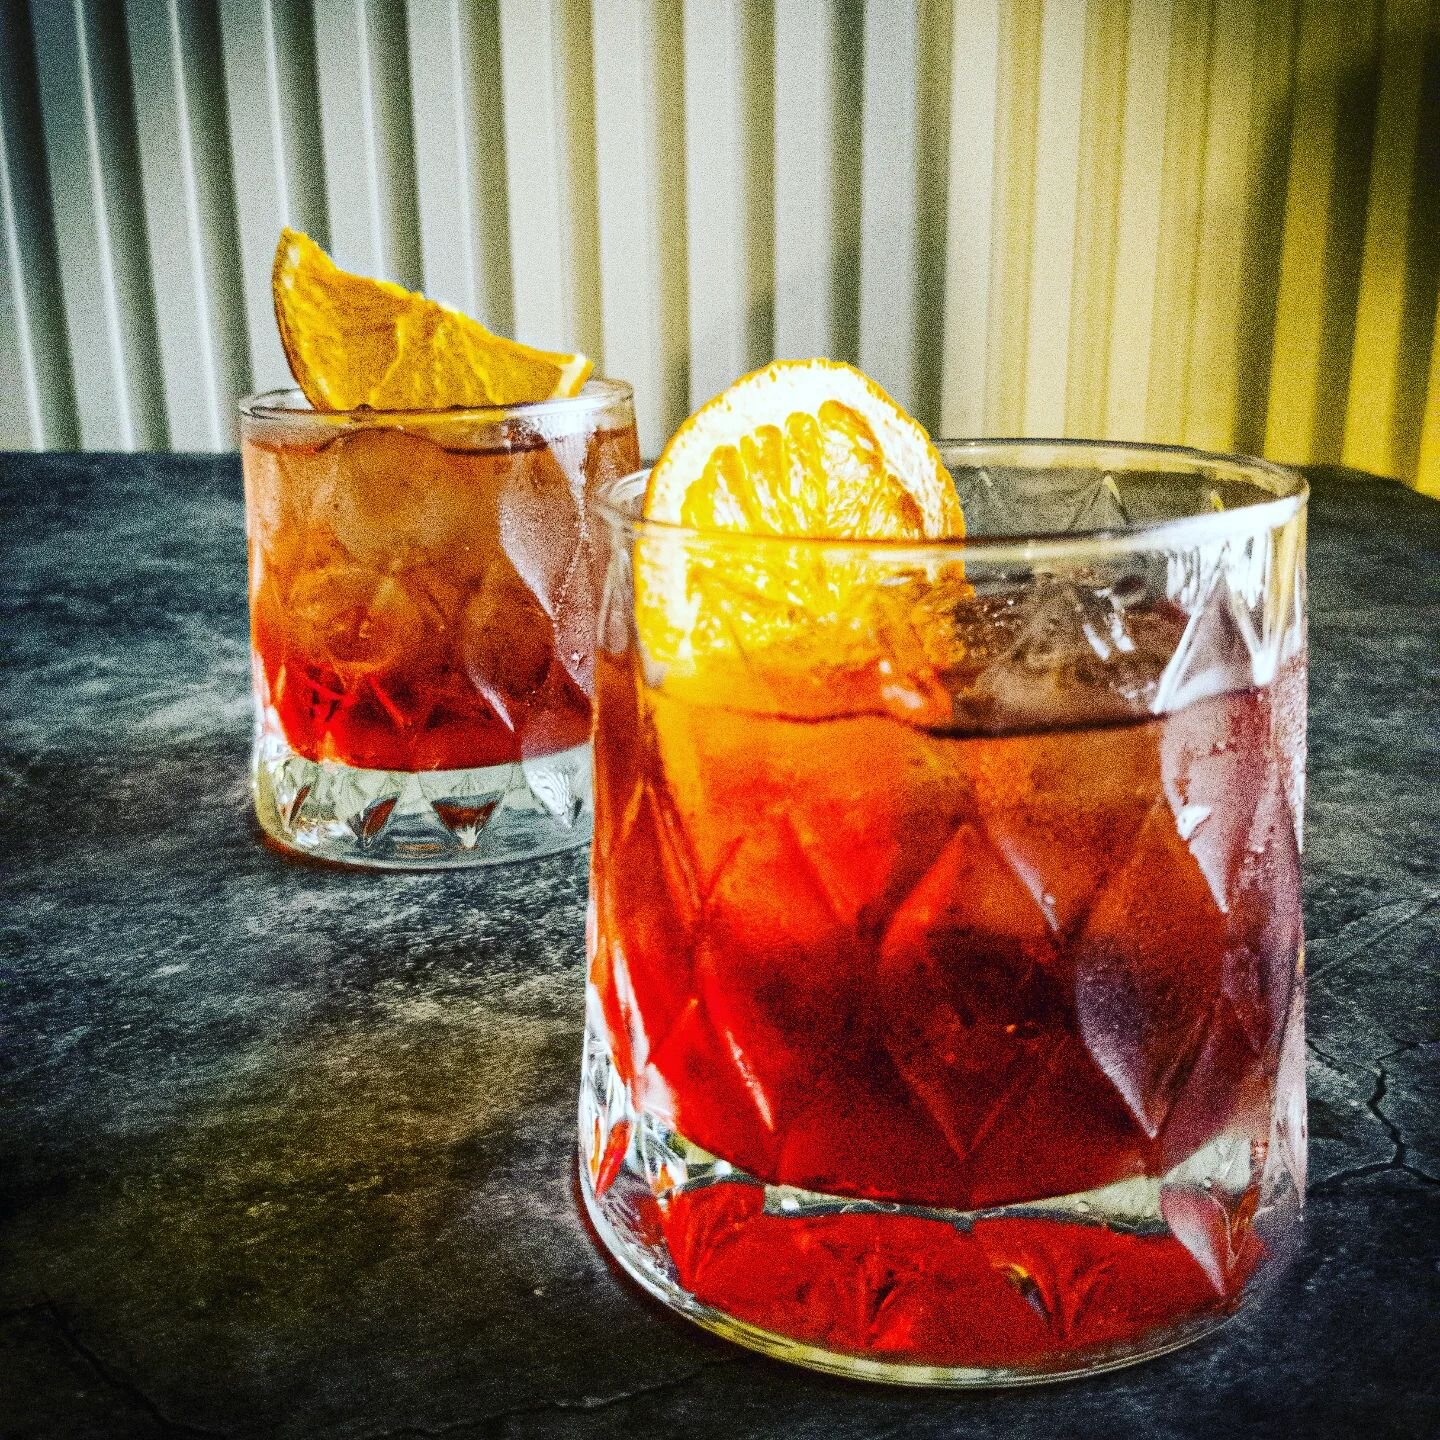 It's Friday night and it's time for a Negroni! Drop by, we're open for dine in until 10pm.

#santamargherita #negroni #americano #neapolitanpizza #pizzanapoletana #maronn #italianfood #camberwell #3124 #camberwell3124 #middlecamberwell